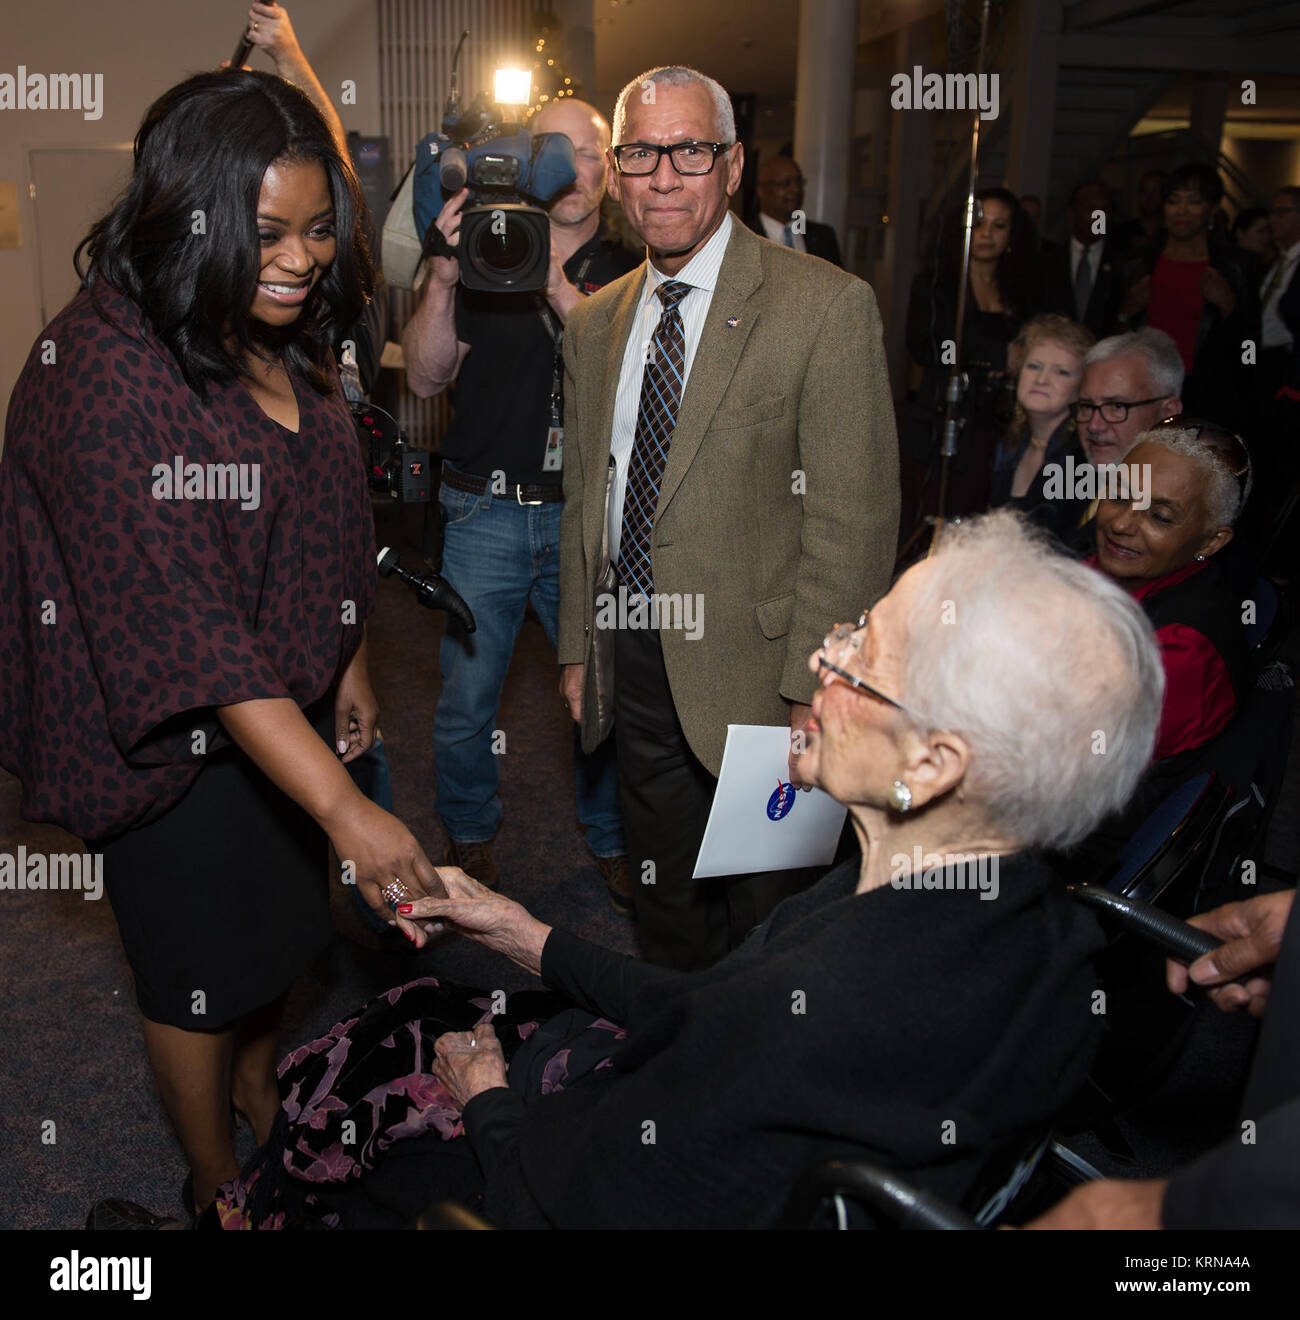 Actress Octavia Spencer, left, who plays Dorothy Vaughan in the film 'Hidden Figures' and NASA Administrator Charles Bolden, right, greets NASA 'human computer' Katherine Johnson, at a reception to honor NASA's 'human computers' on Thursday, Dec. 1, 2016, at the Virginia Air and Space Center in Hampton, VA. Afterward, the guests attended a premiere of 'Hidden Figures' a film which stars Taraji P. Henson as Katherine Johnson, the African American mathematician, physicist, and space scientist, who calculated flight trajectories for John Glenn's first orbital flight in 1962. Photo Credit: (NASA/A Stock Photo